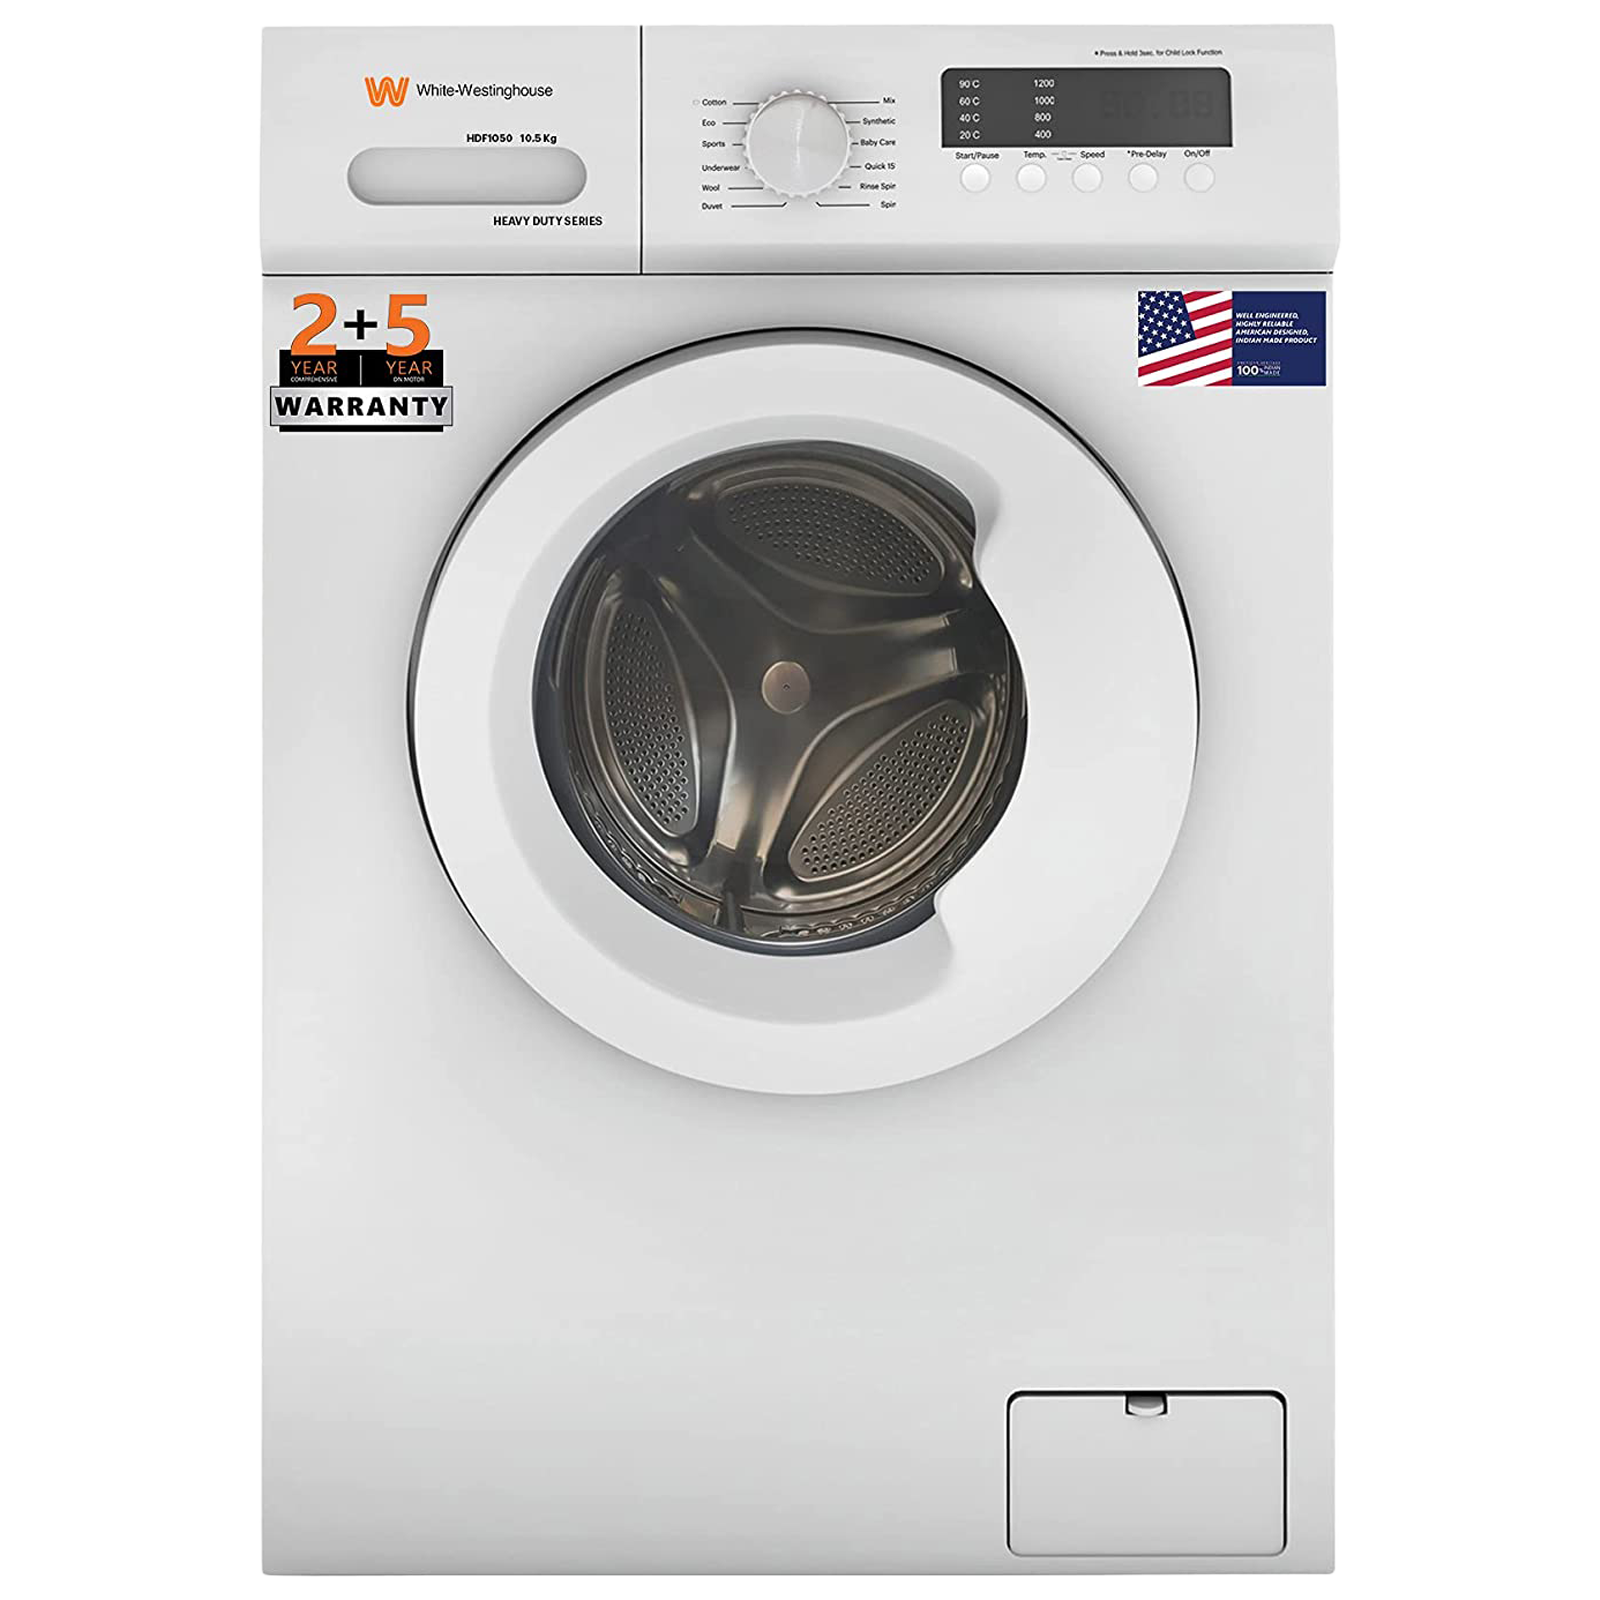 [For ICICI Bank Credit Card EMI] White Westinghouse 10.5 kg Fully Automatic Front Load Washing Machine (HDF1050, In-built Heater, White)